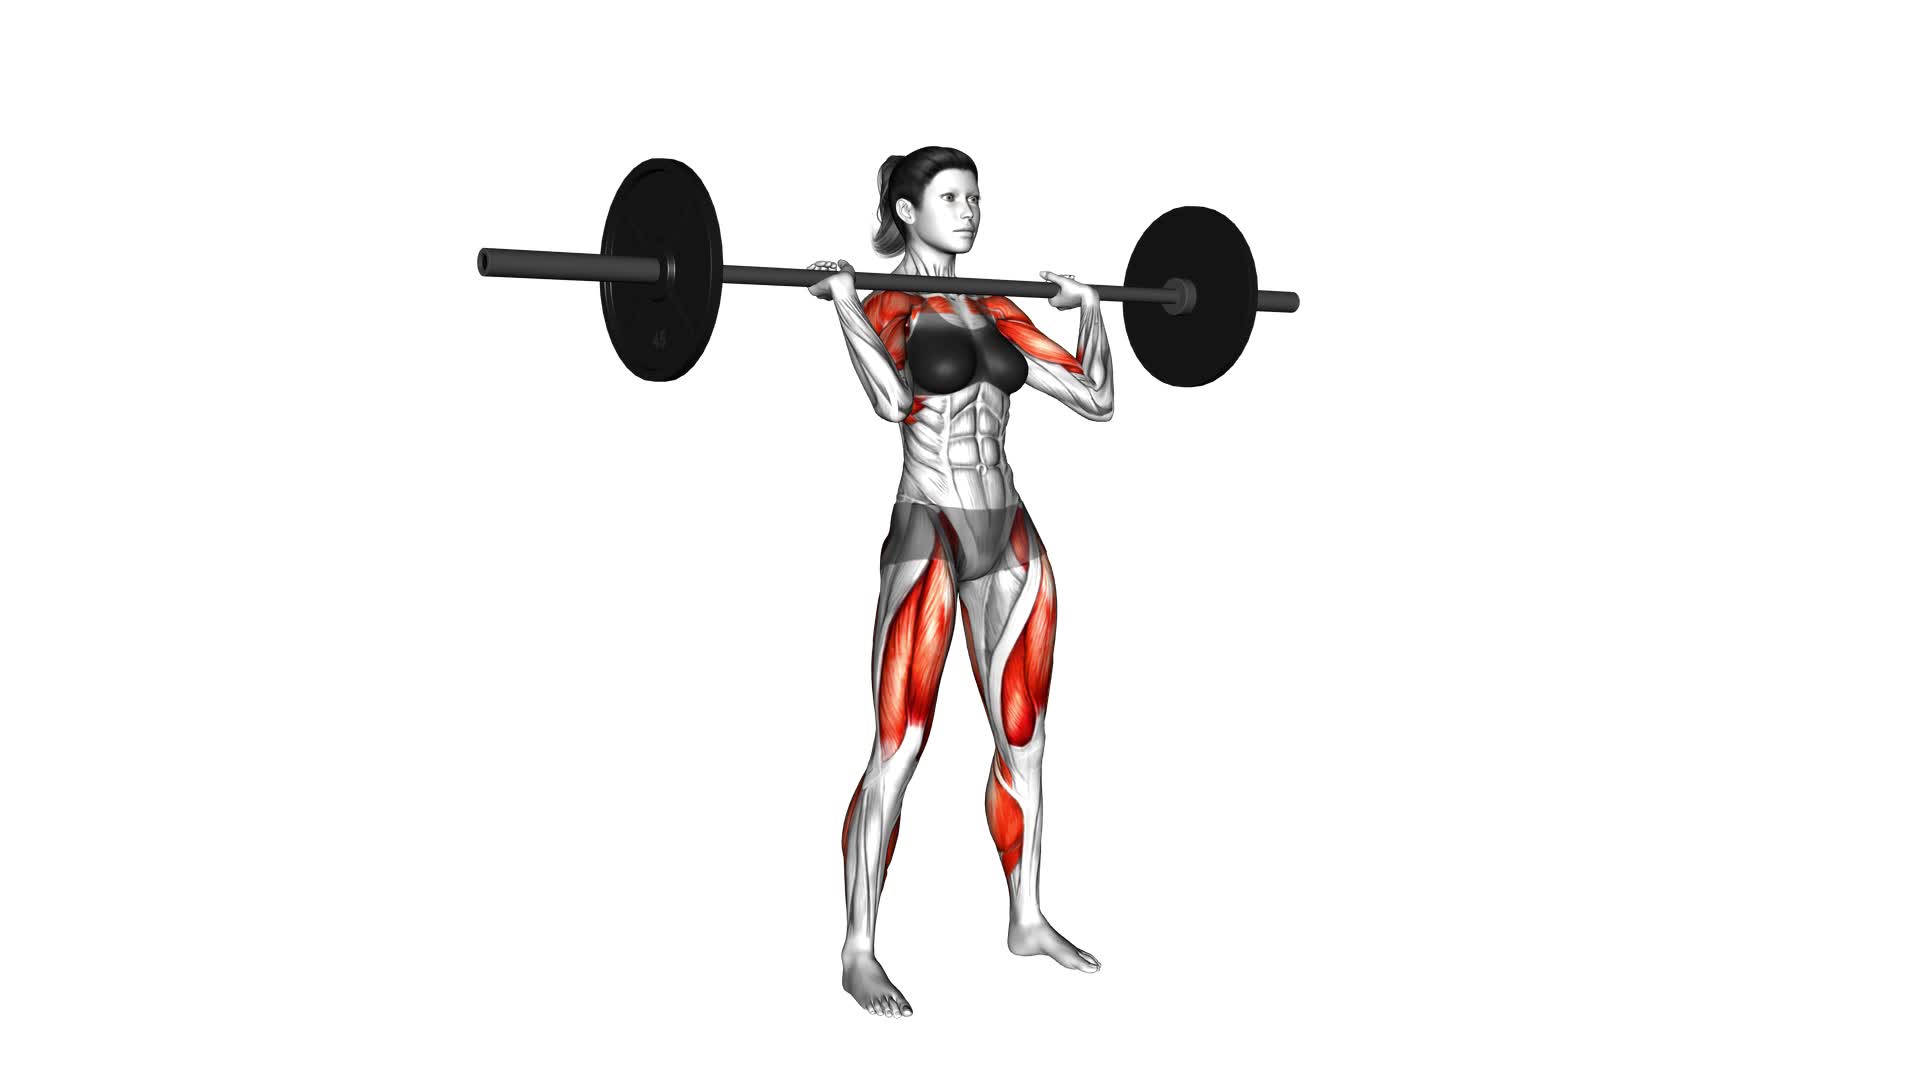 Barbell Power Clean (female) - Video Exercise Guide & Tips